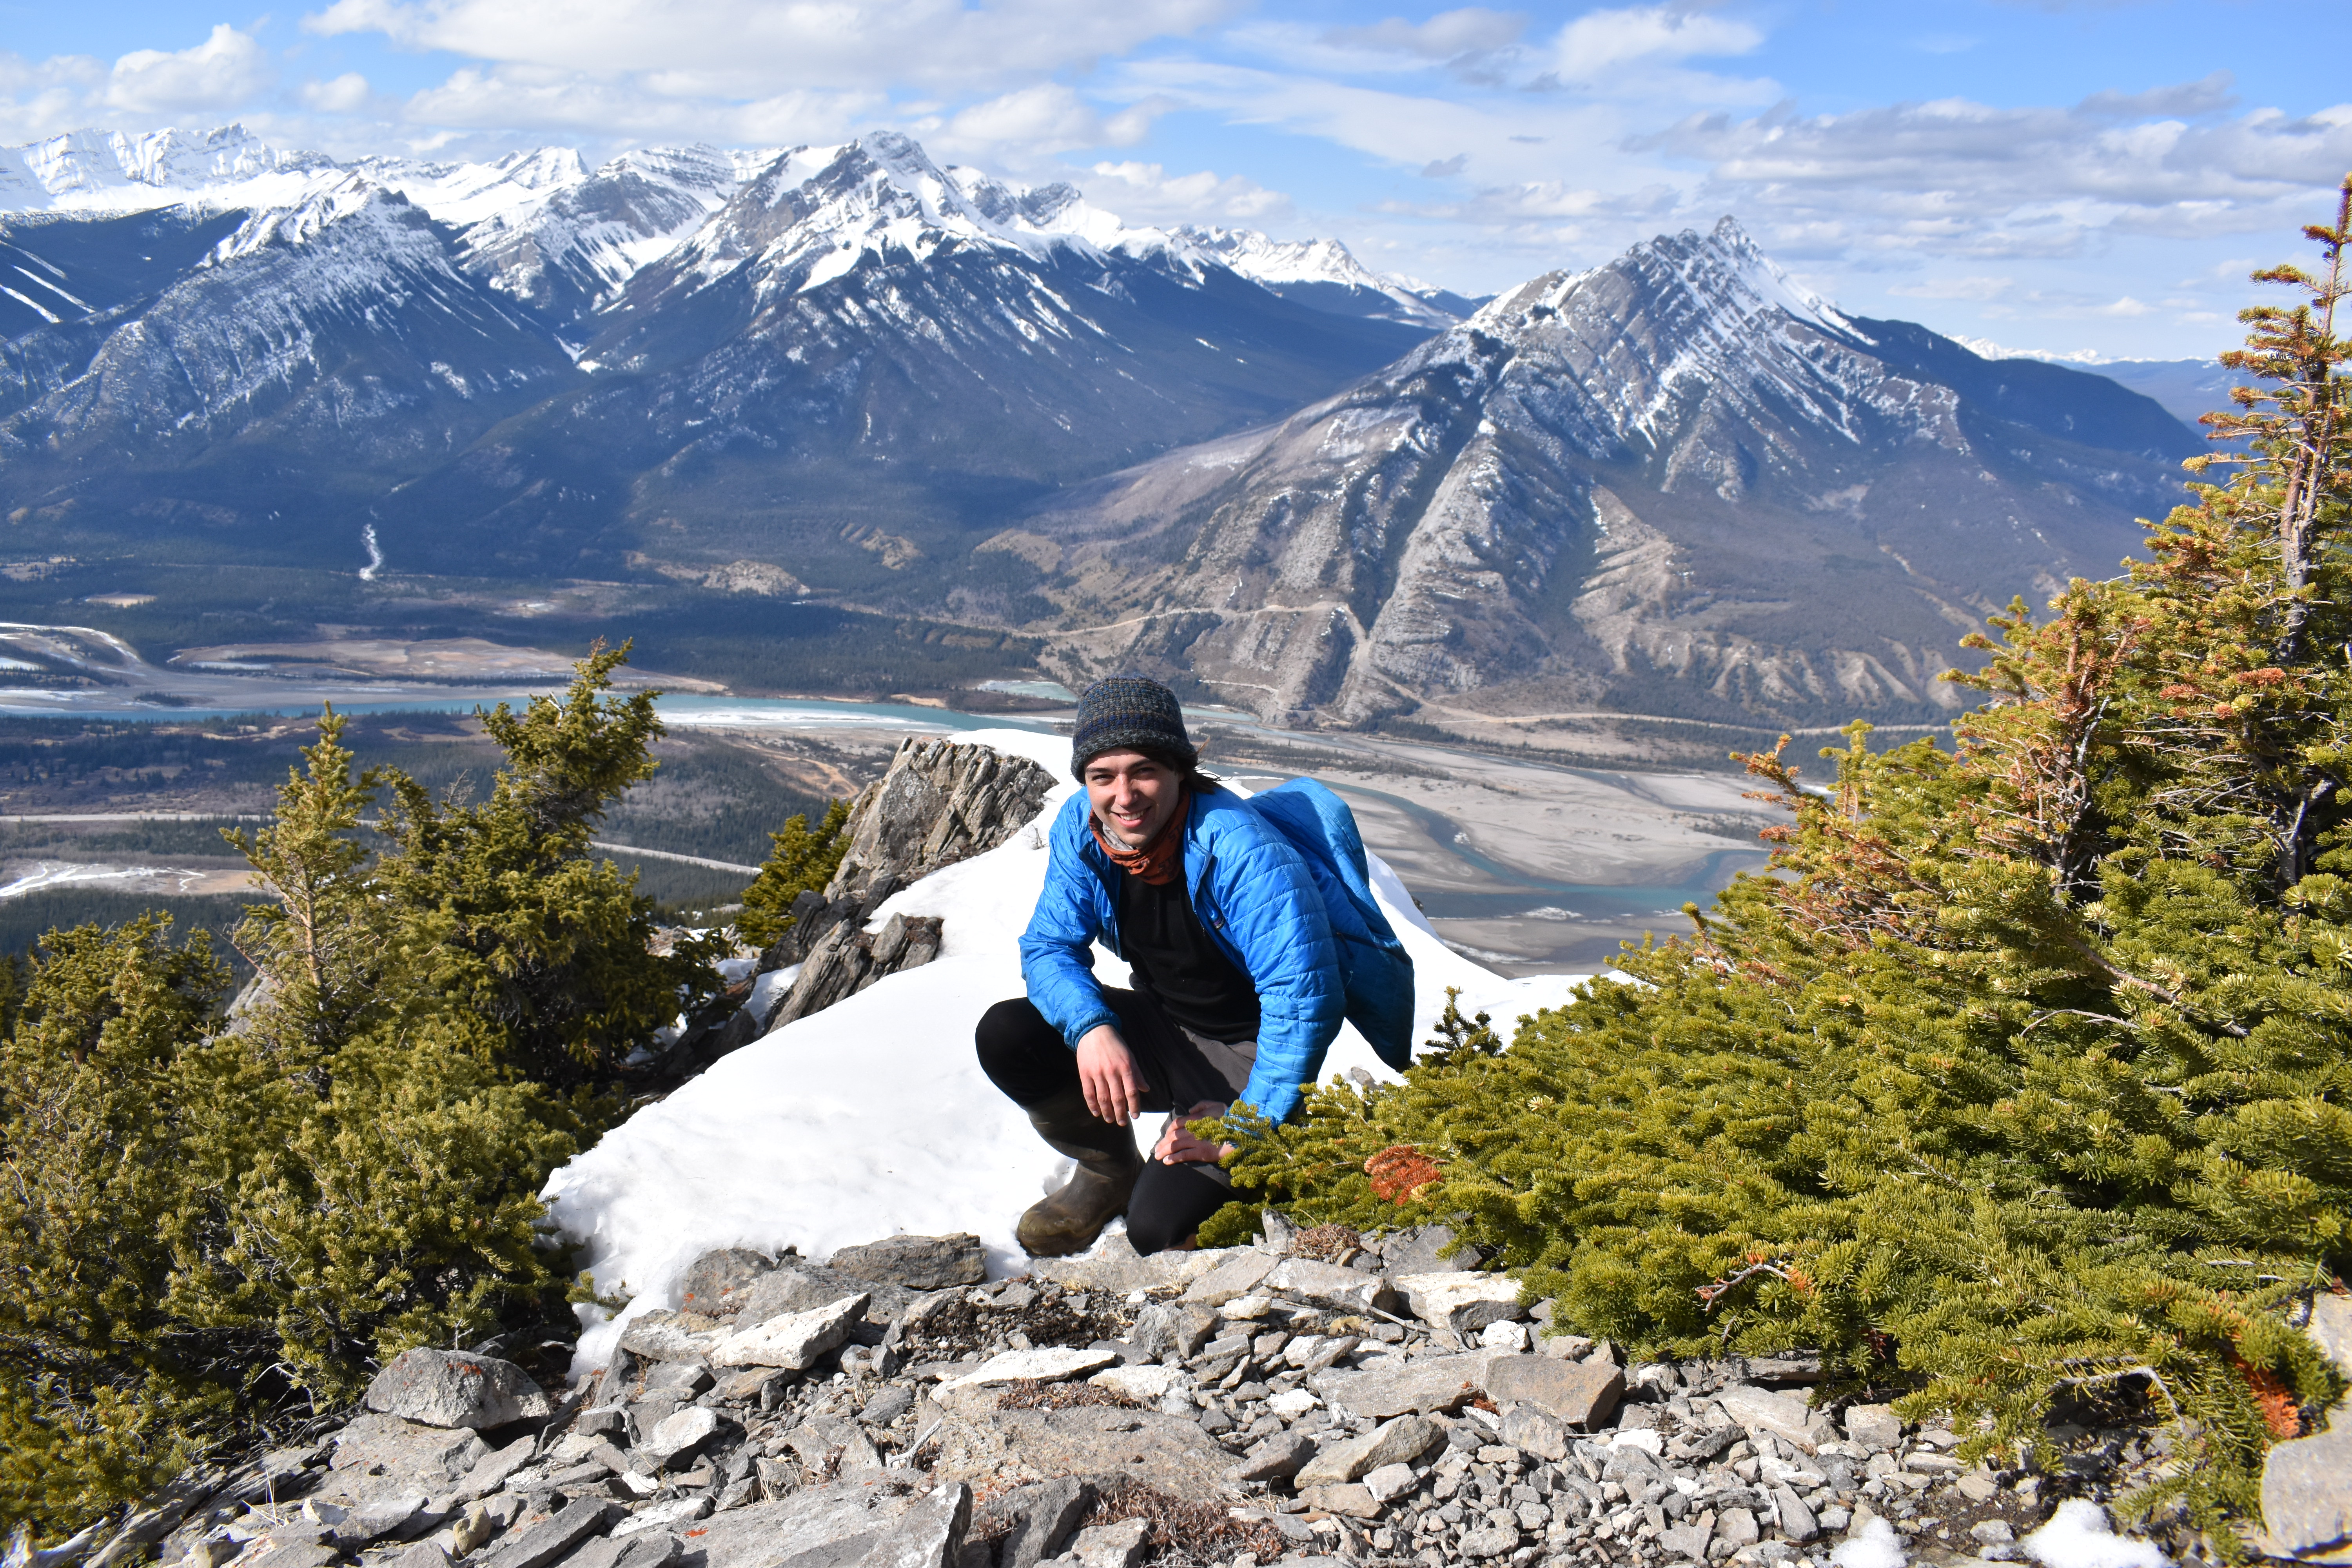 Sustainability of natural resources is important to master’s student Jordan Shirley, who is seen here hiking in Jasper, Alta. (Photo: Submitted) 